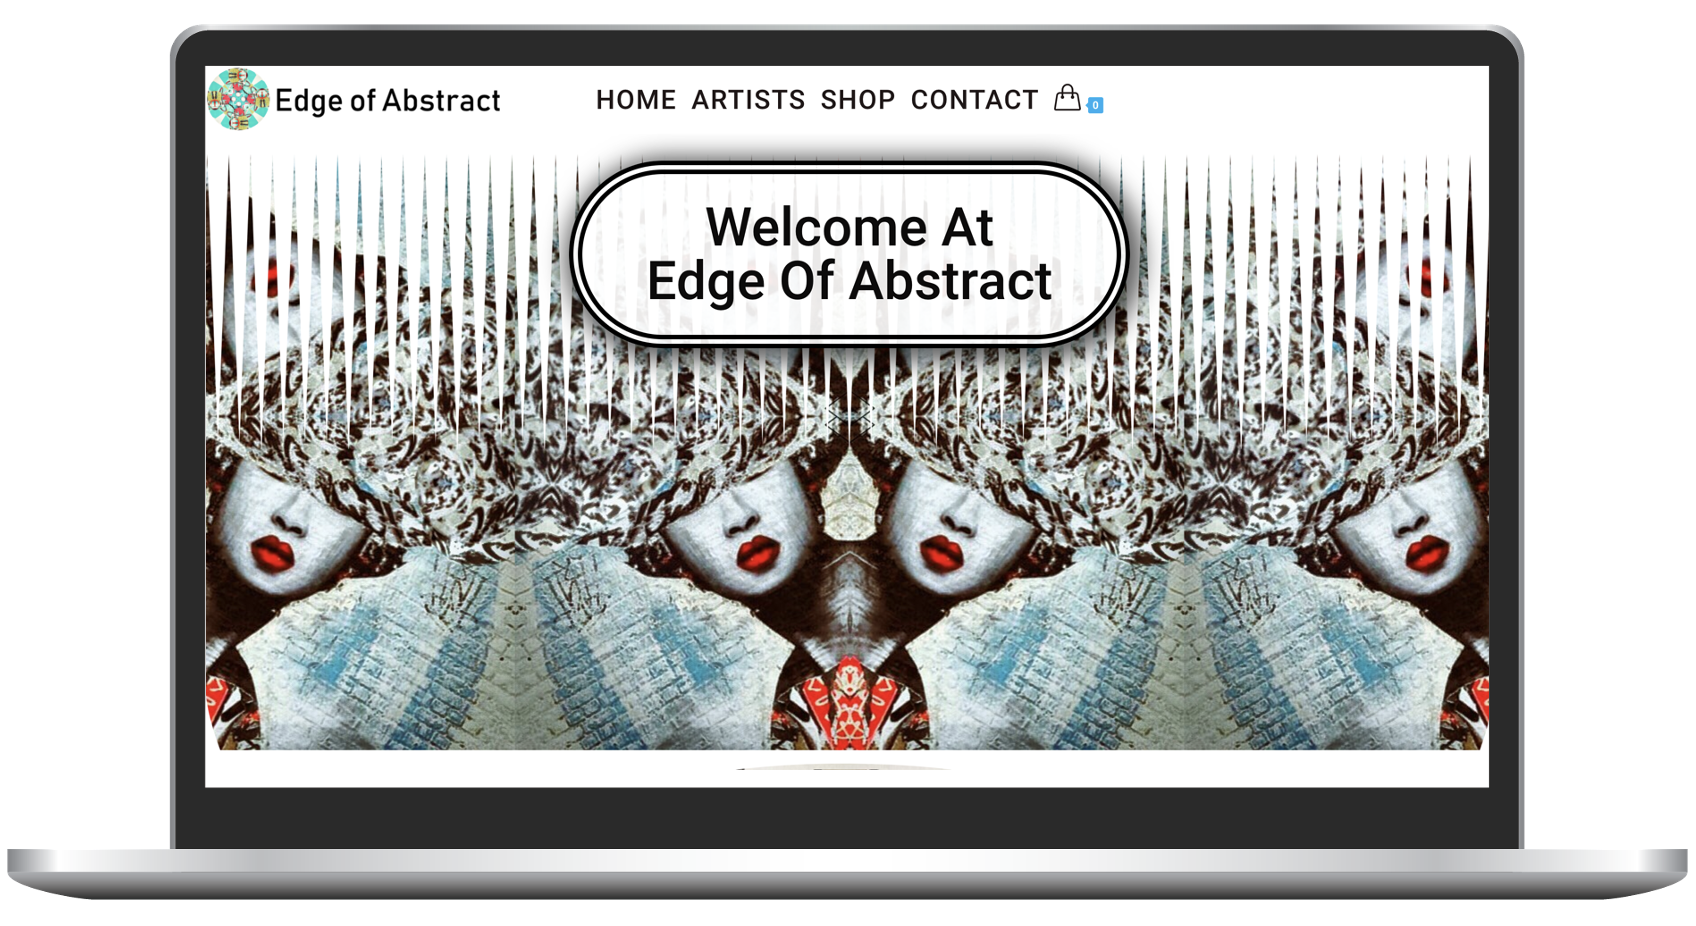 www.edge-of-abstract.com